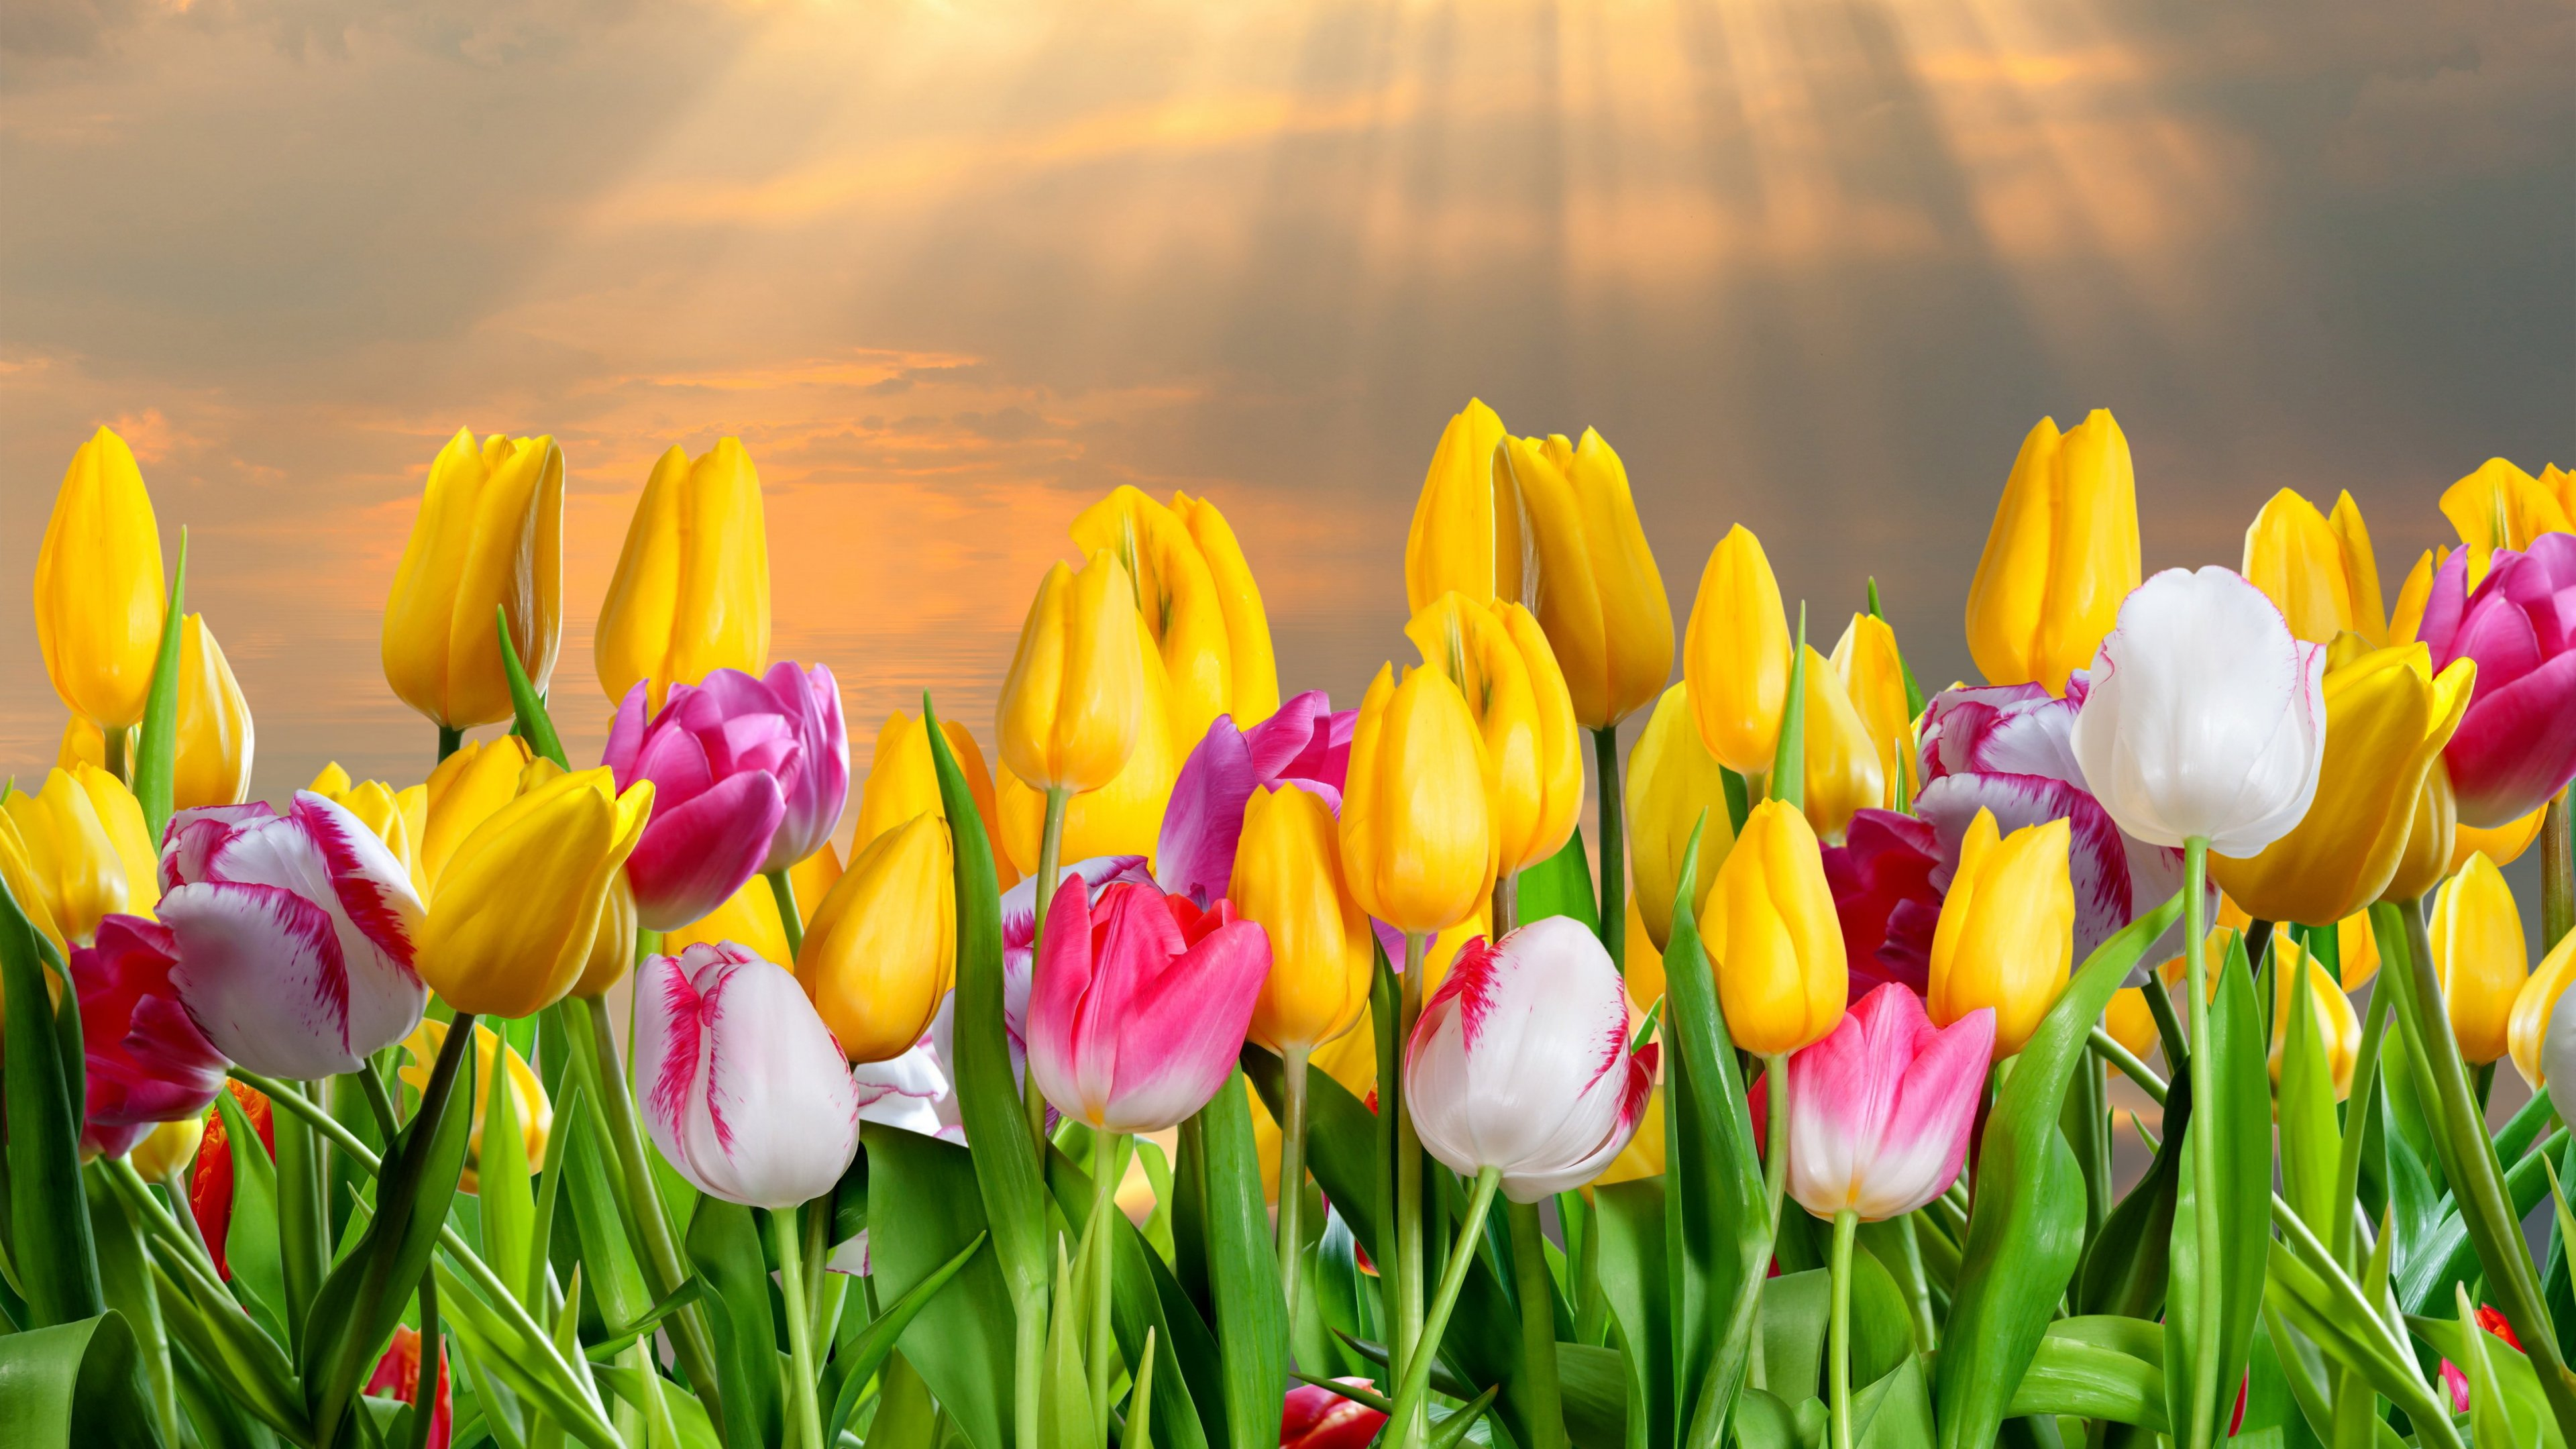 3840x2160 250+ 4K Tulip Wallpapers | Background Images